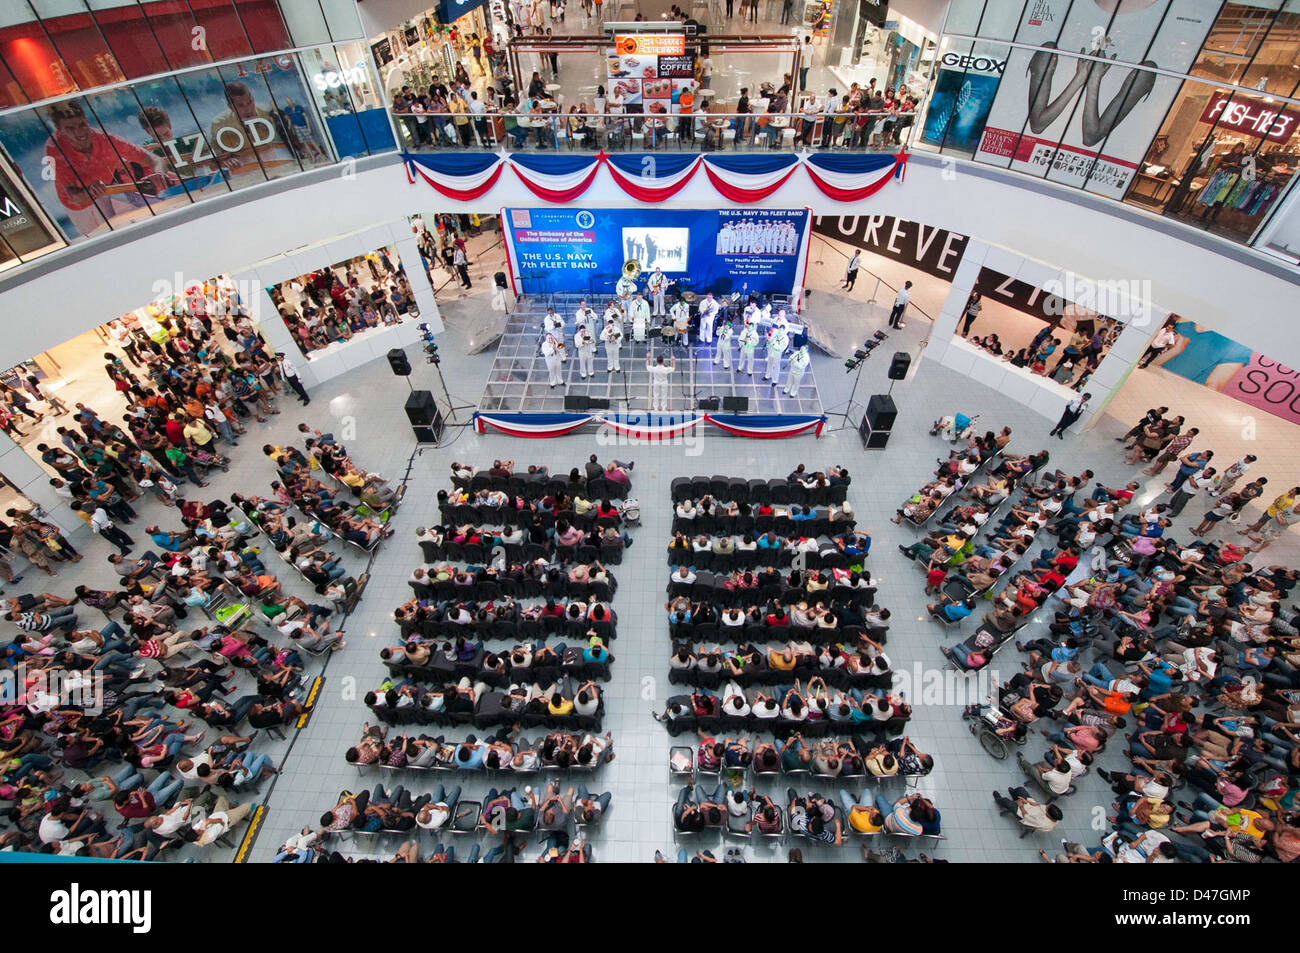 Members of the U.S. 7th Fleet Band, Pacific Ambassadors, perform for more than 3,600 people at SM City North ESDA Supermall. Stock Photo